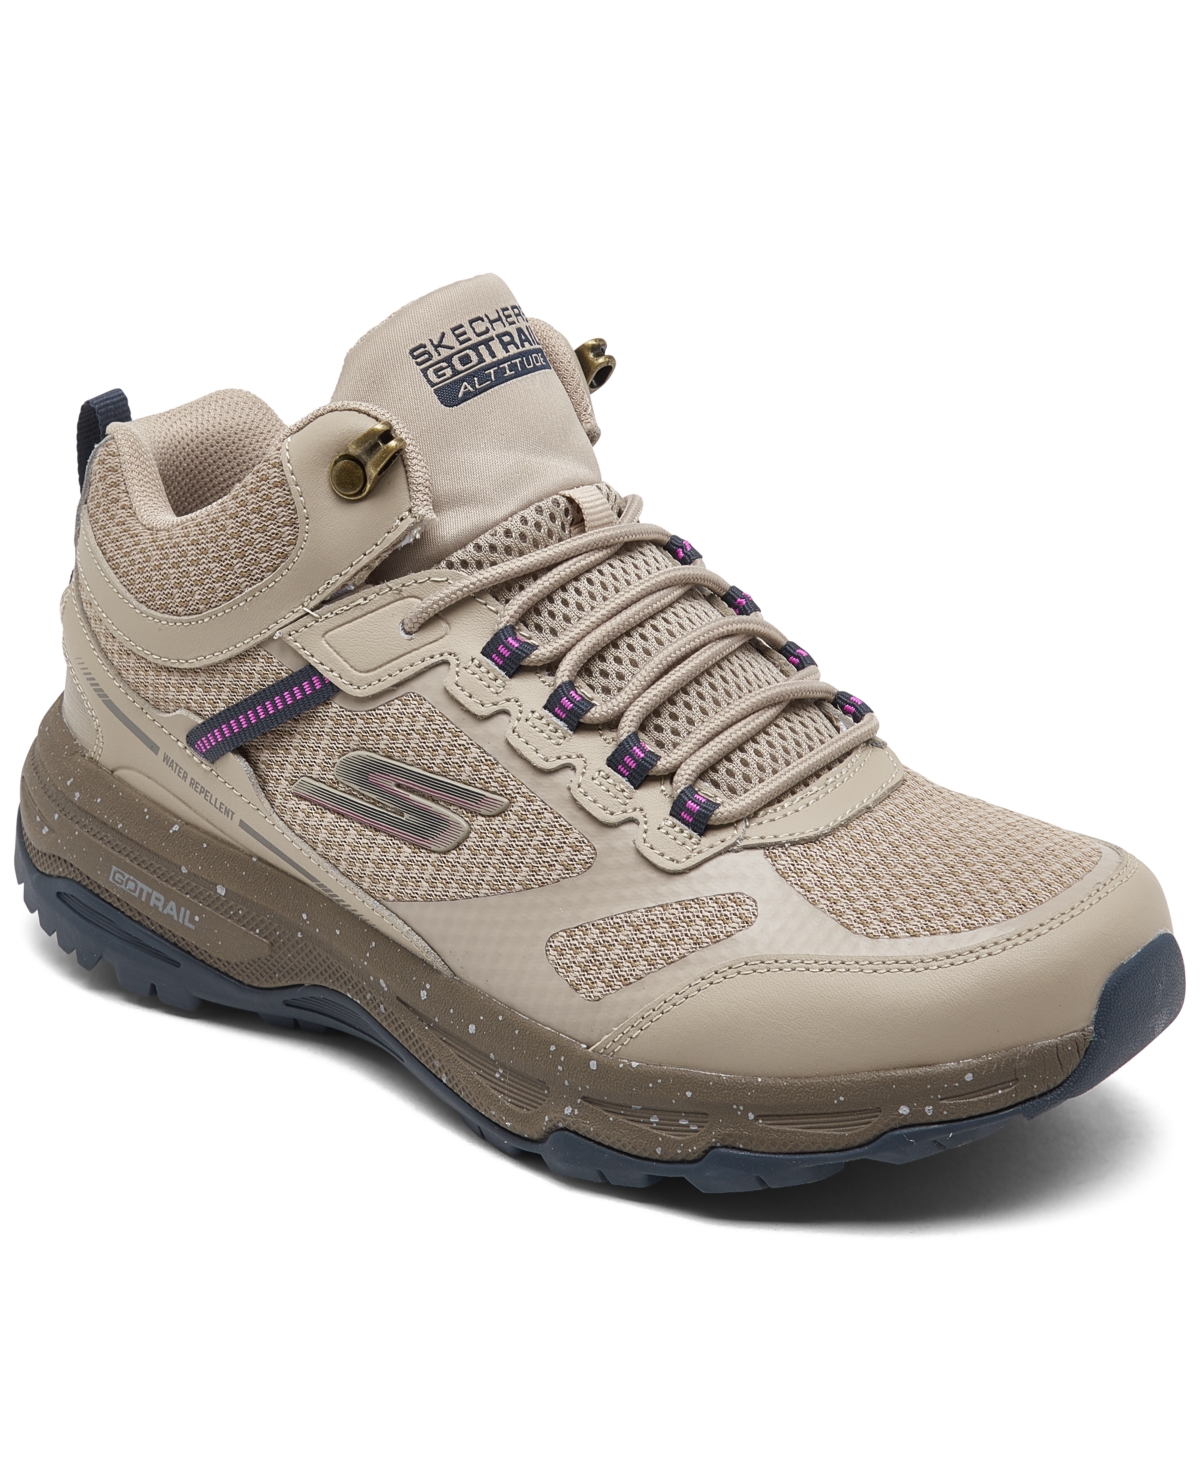 Women's Go run Trail Altitude Trail Running Sneakers from Finish Line - Taupe/navy